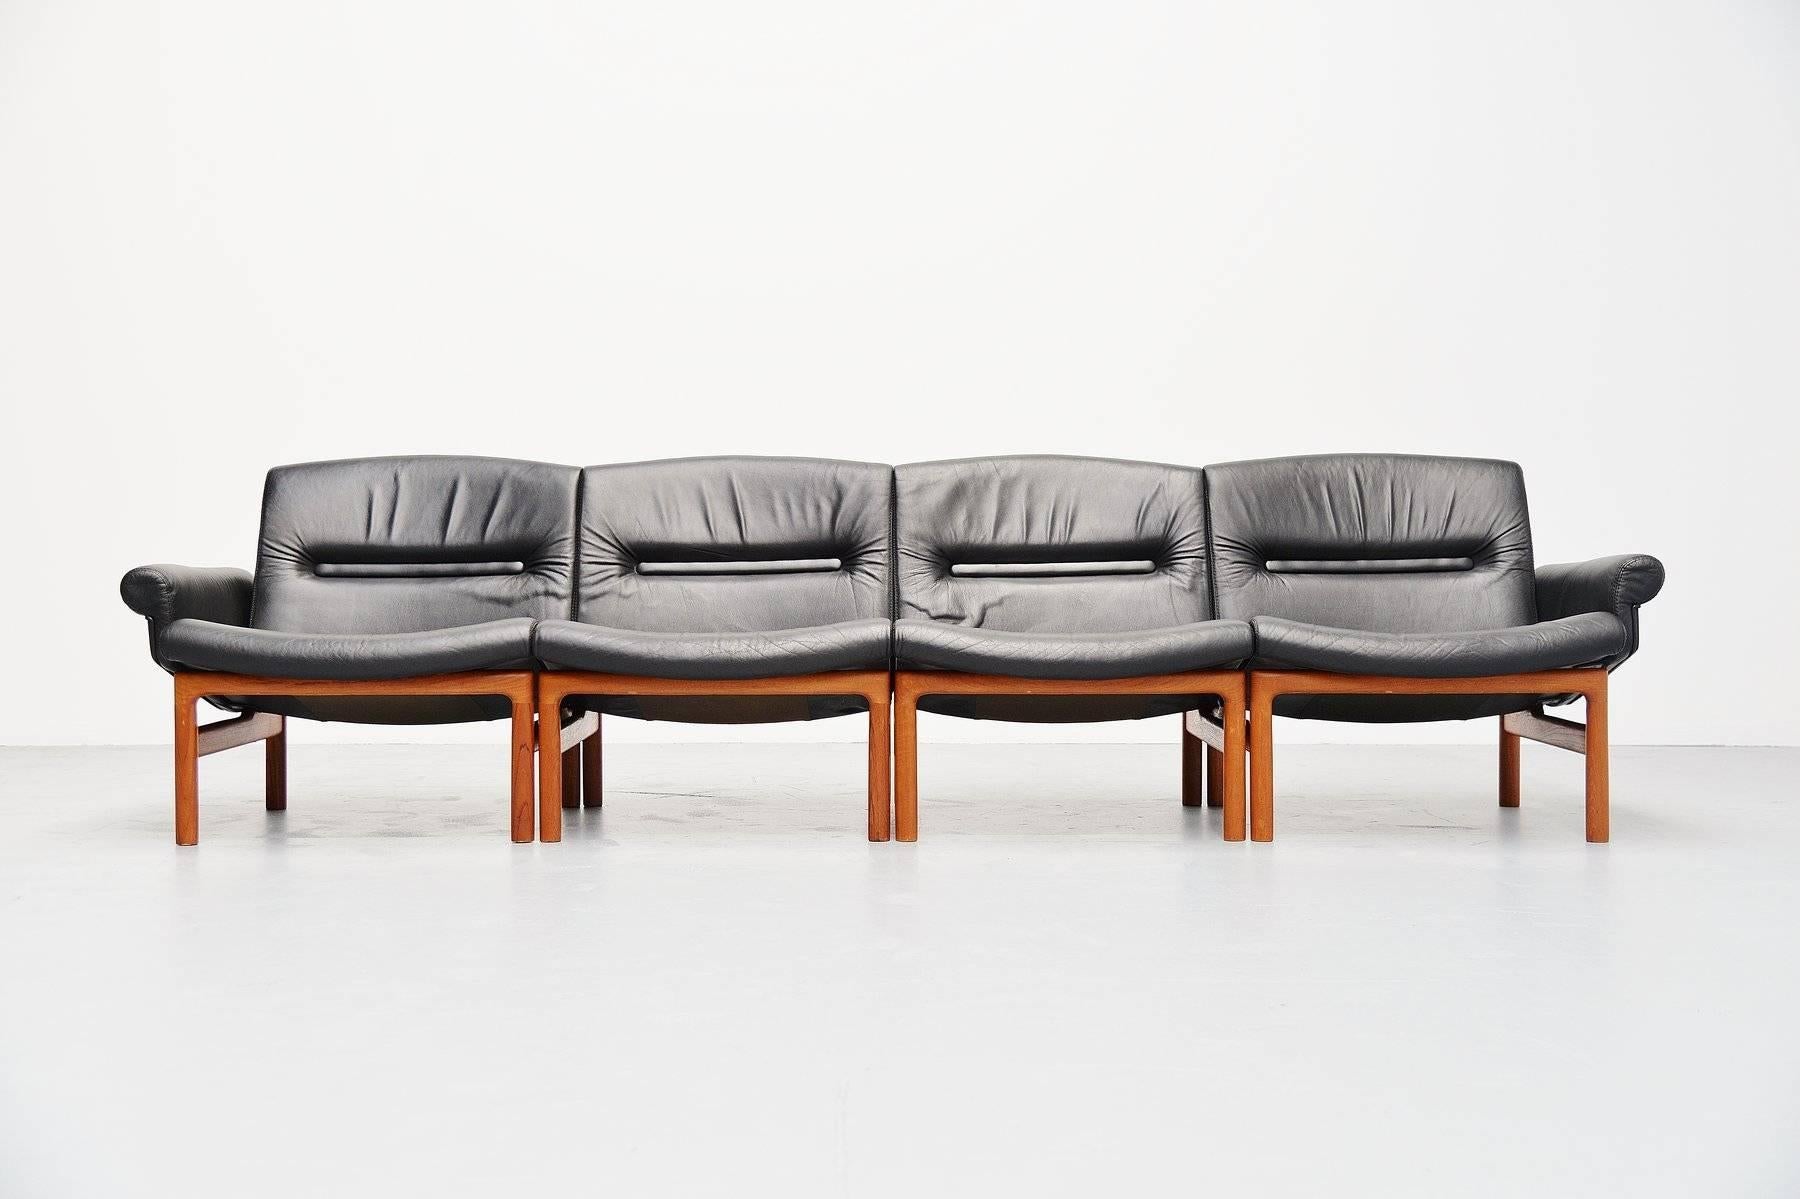 Very nice elemented sofa made by unknown manufacturer, Denmark, 1965. This sofa has four elements, two with arms and two without. Could be used as four-seat sofa of two-seat and two easy chairs. The frame is made of solid teak wood and has black